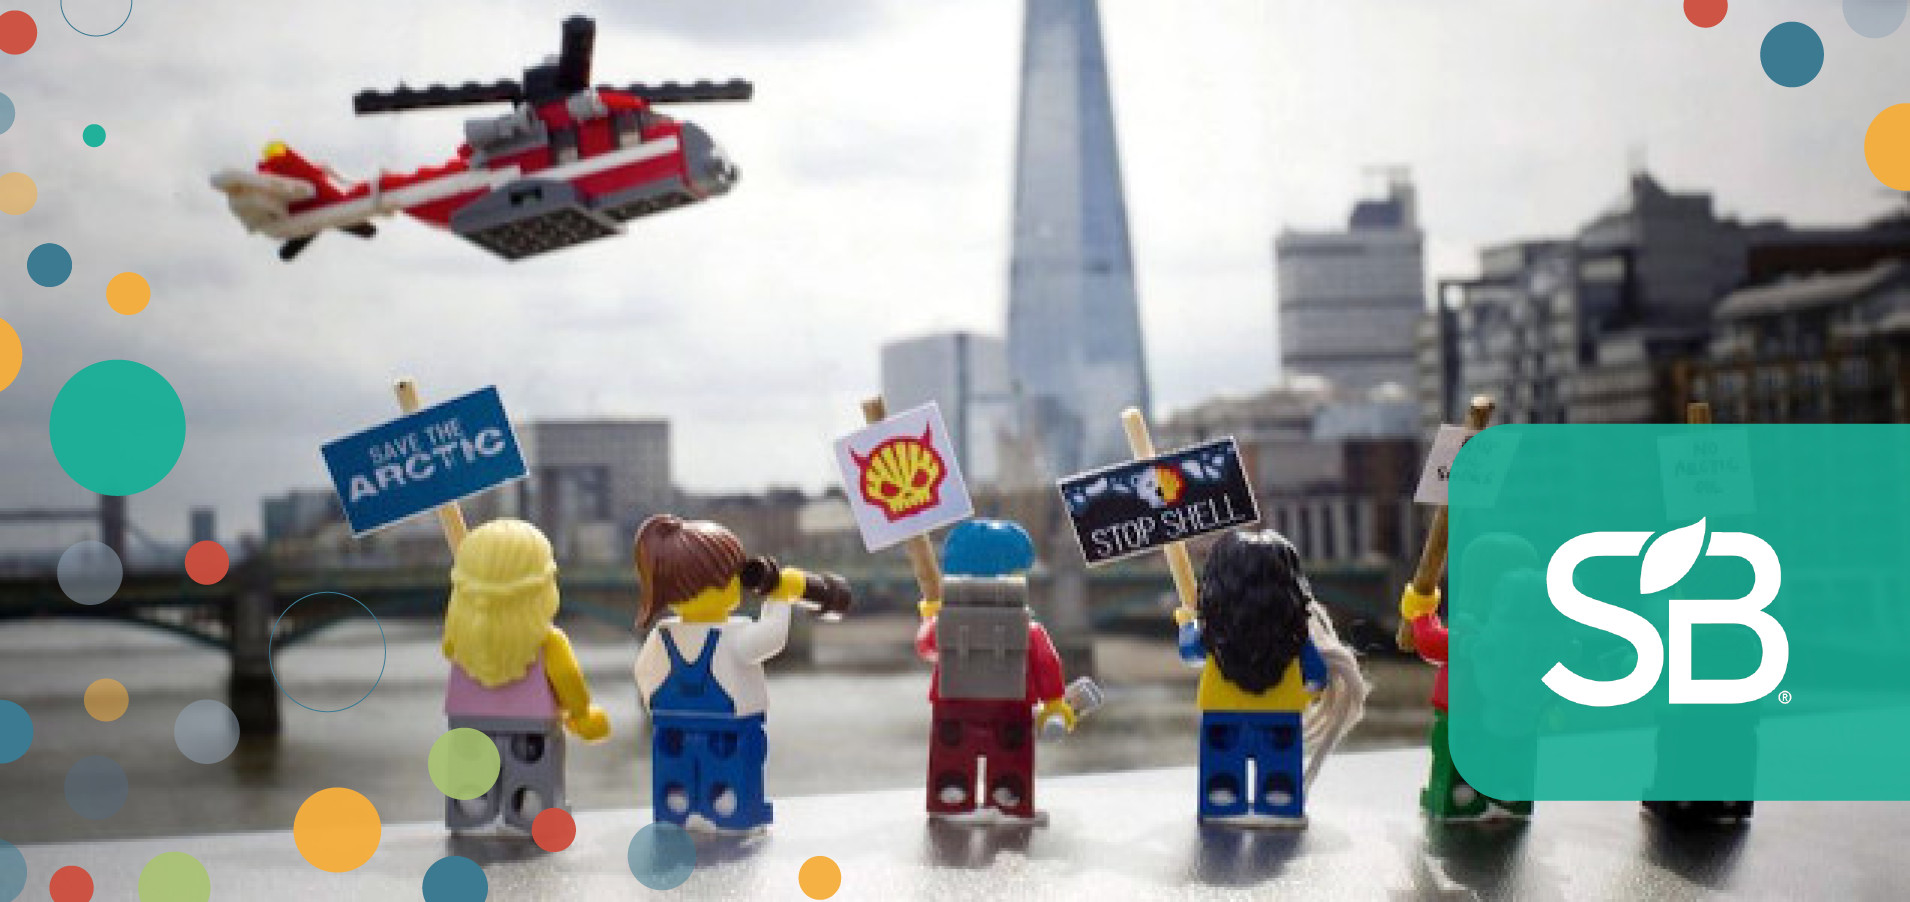 Greenpeace victory - LEGO ends Shell promotion link